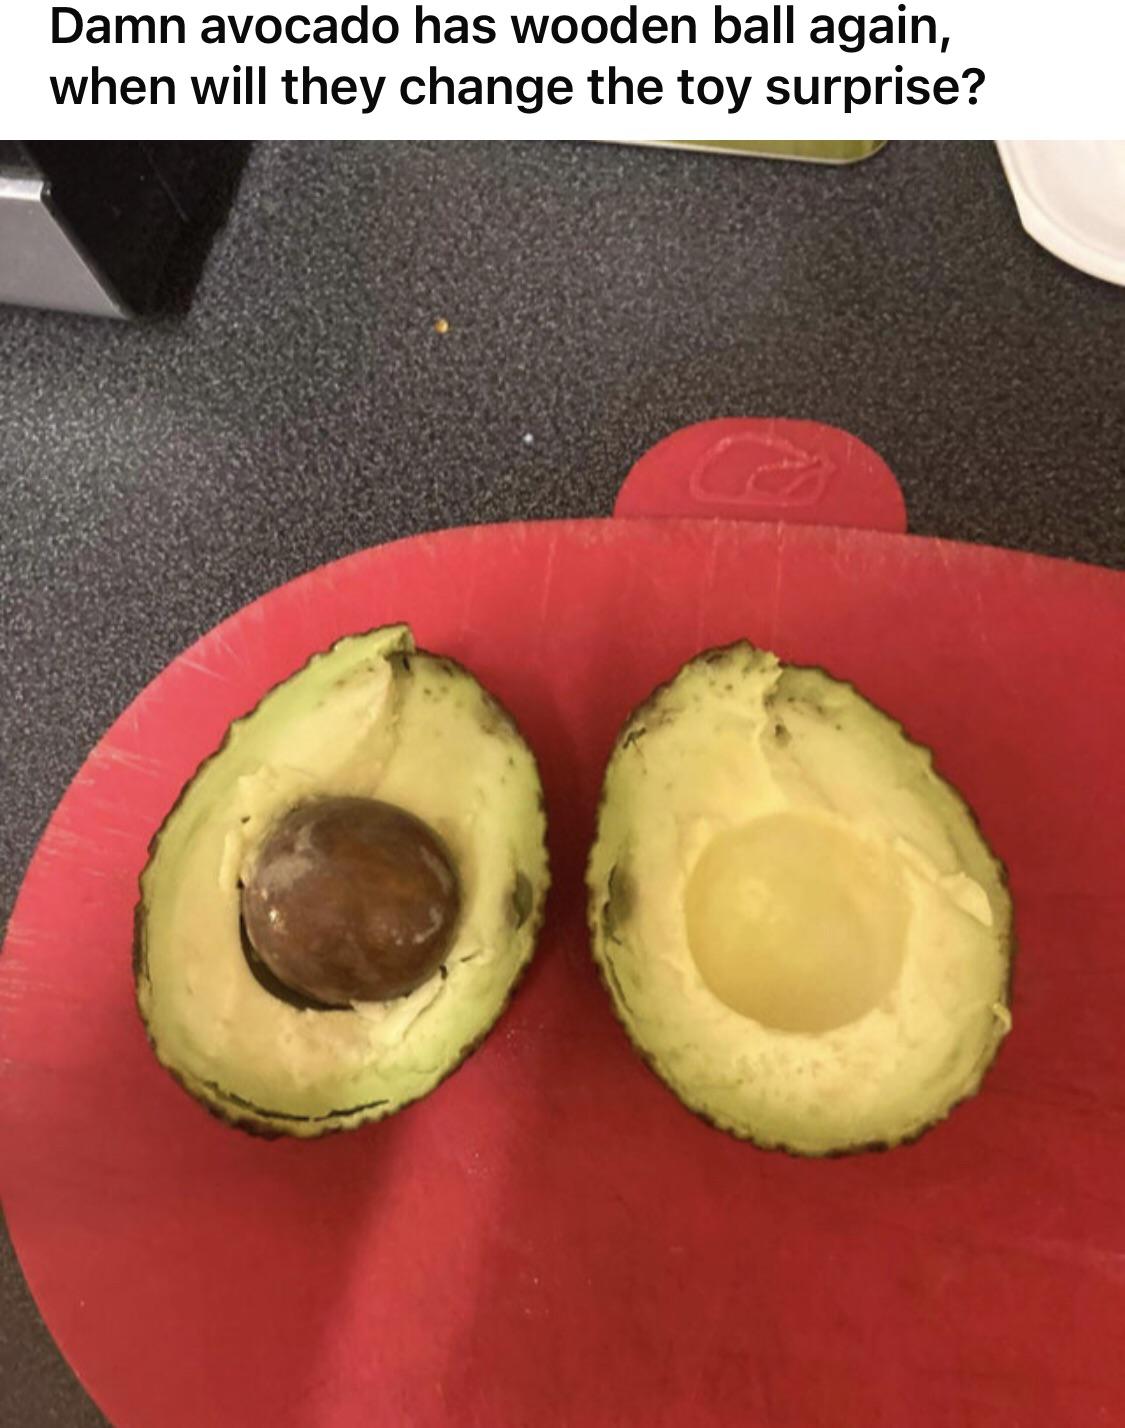 funny memes - dank memes - avocado - Damn avocado has wooden ball again, when will they change the toy surprise?